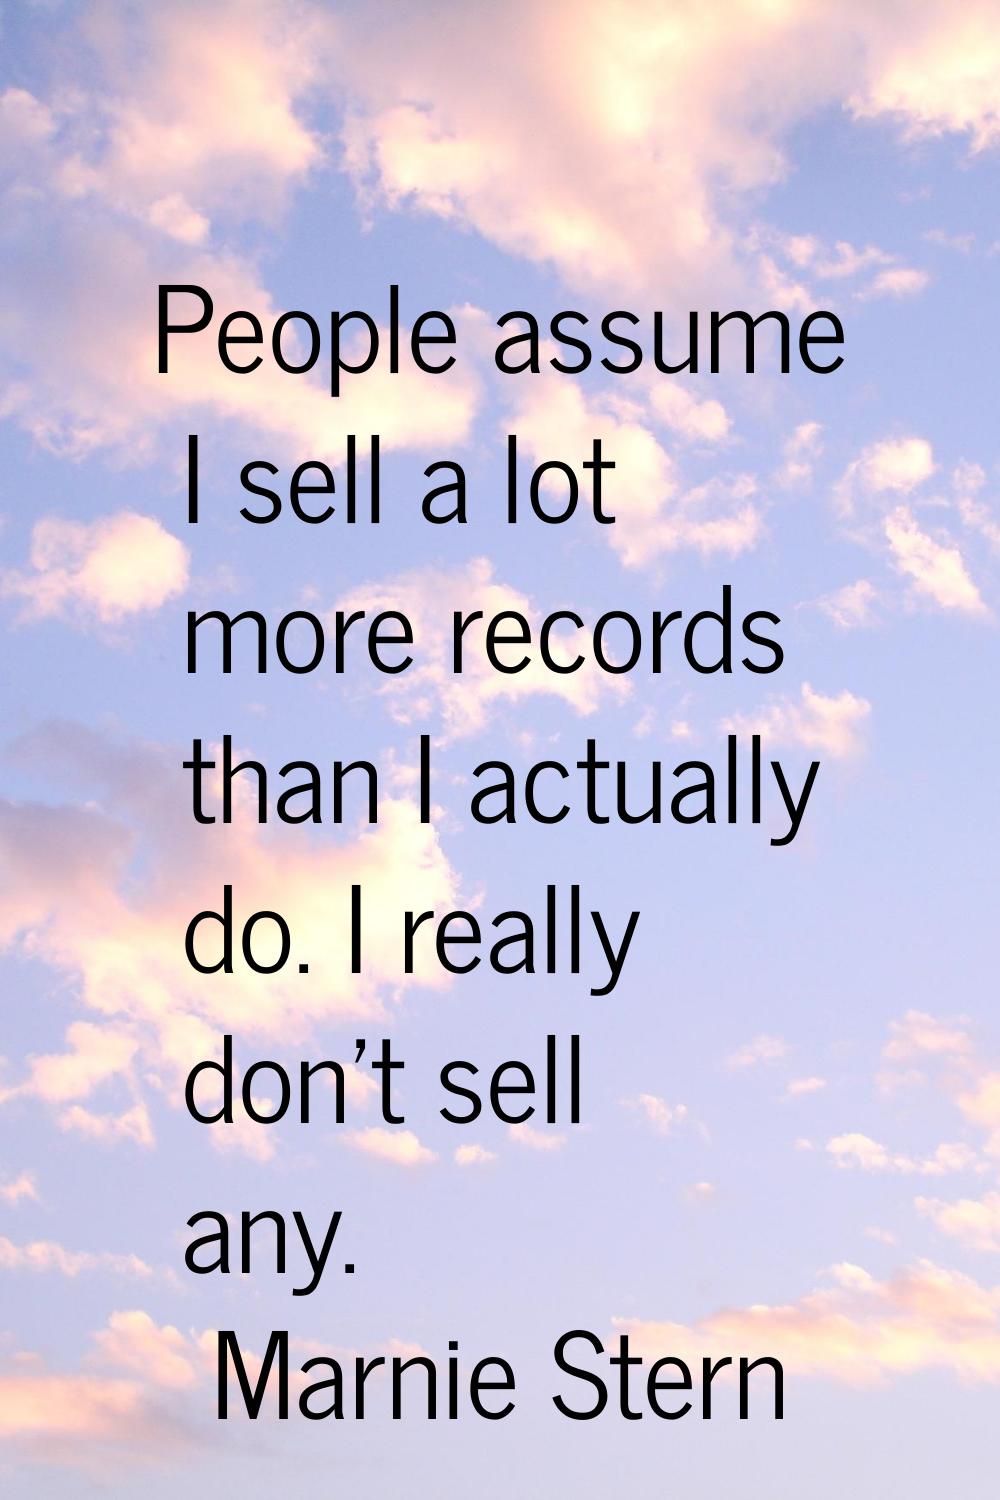 People assume I sell a lot more records than I actually do. I really don't sell any.